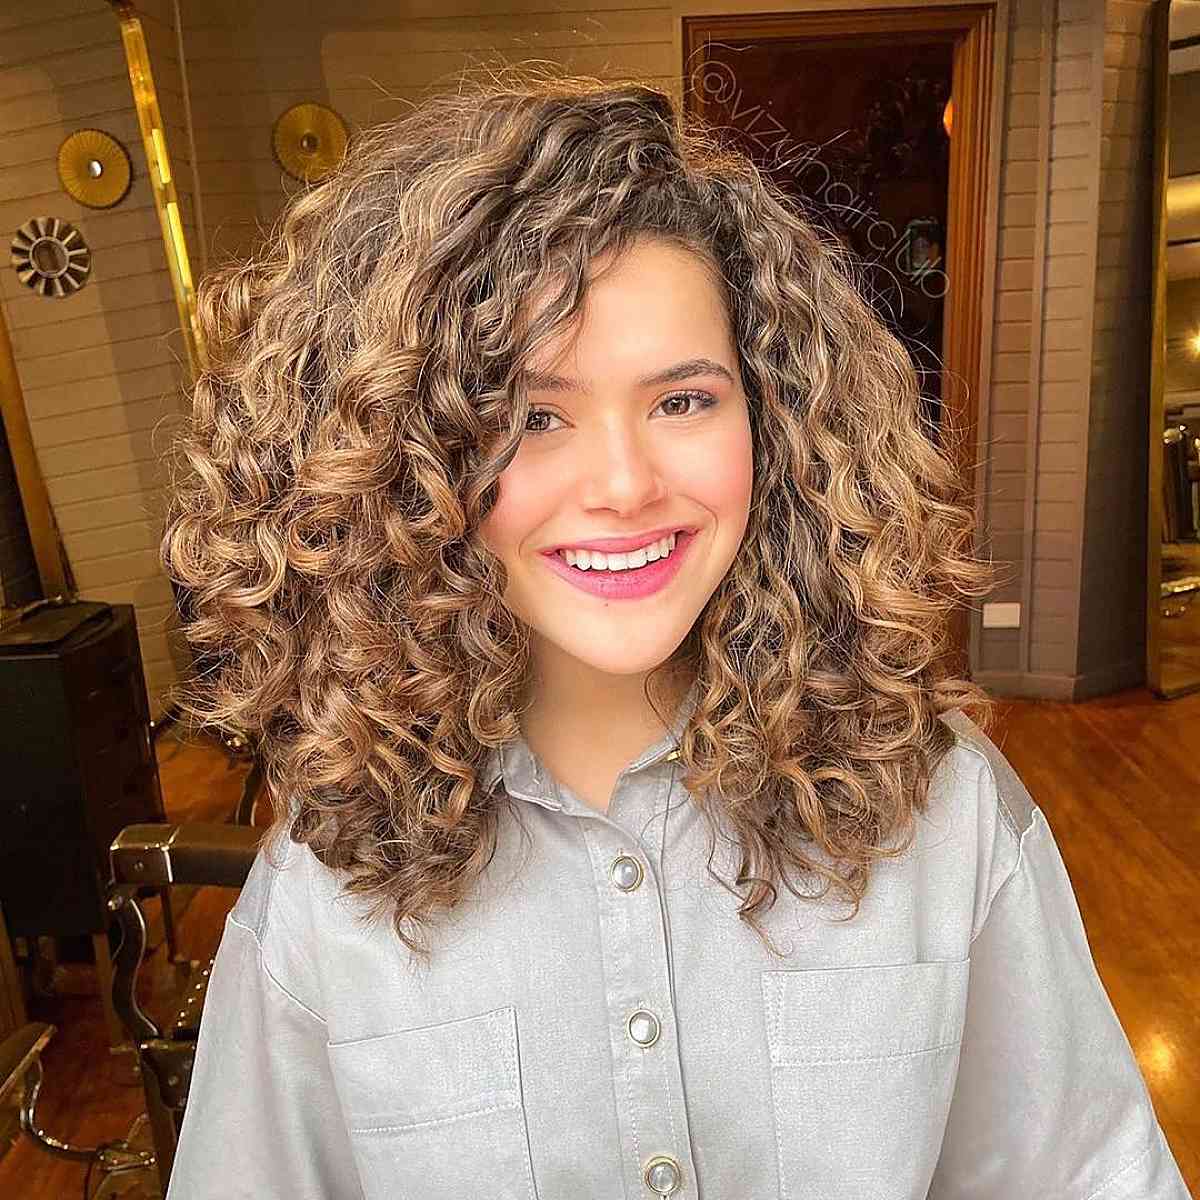 shoulder-length curly locks with side bangs